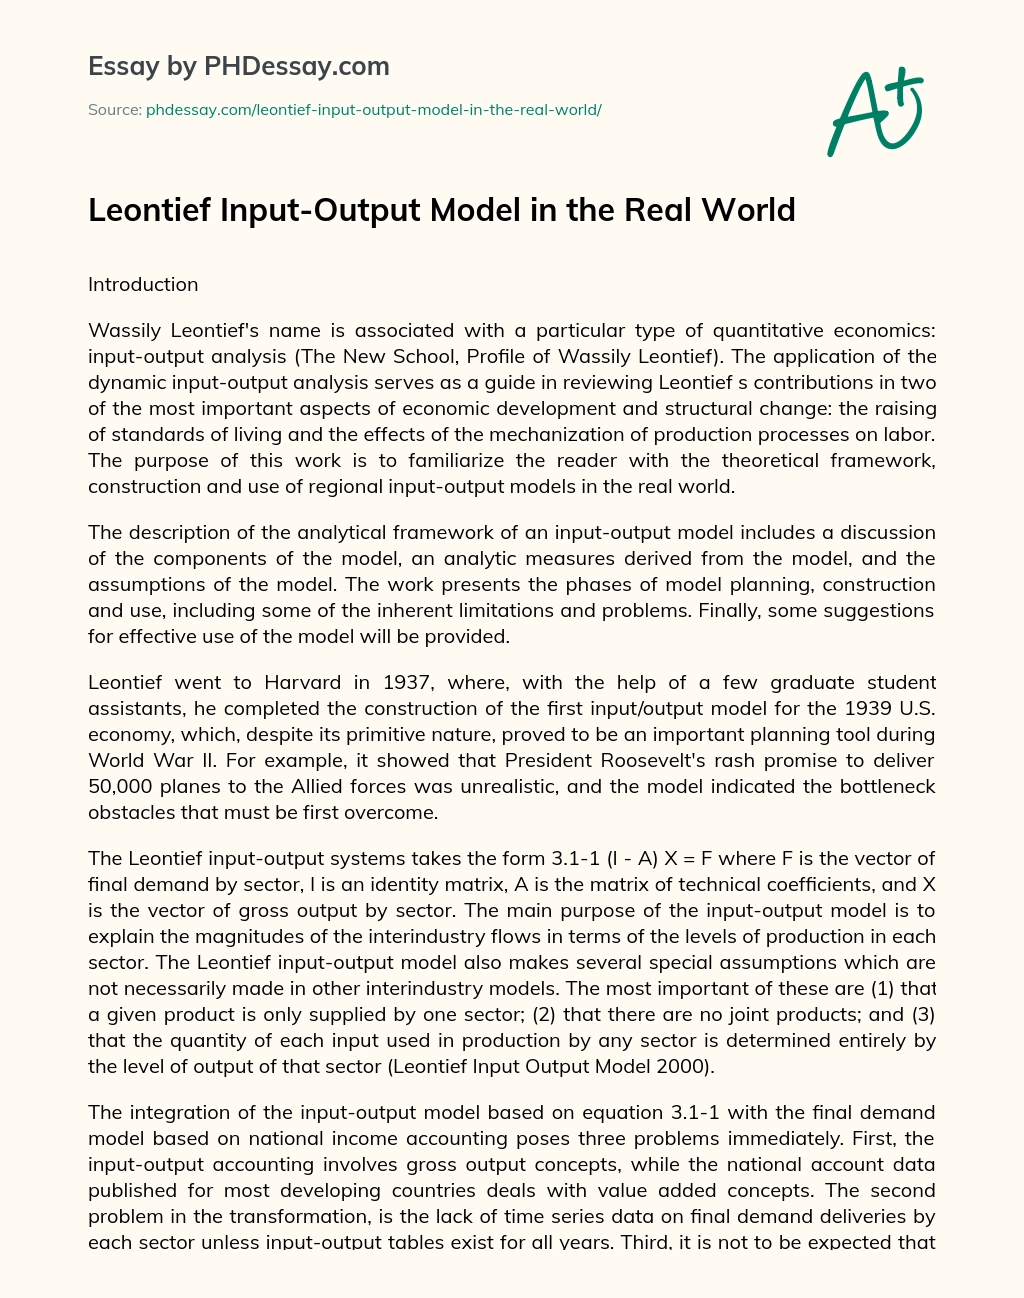 Leontief Input-Output Model in the Real World essay